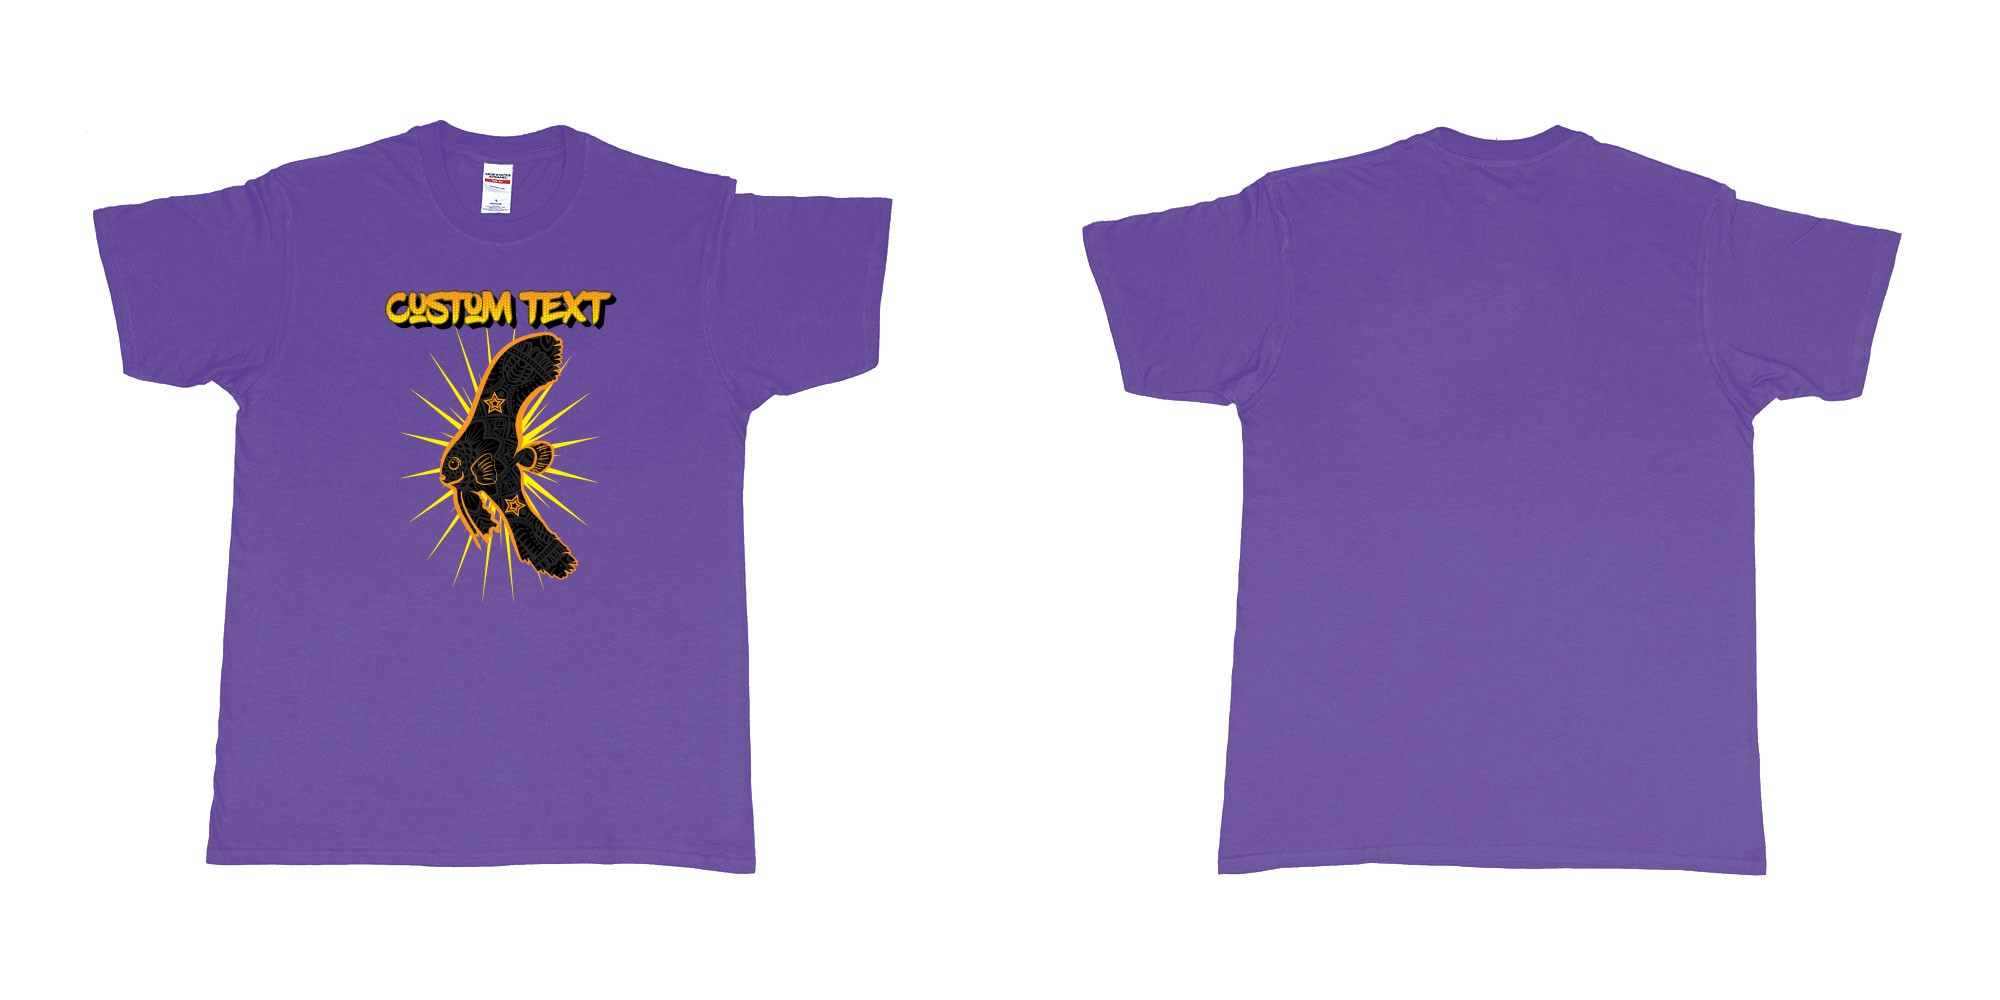 Custom tshirt design batfish juvenile star own text in fabric color purple choice your own text made in Bali by The Pirate Way